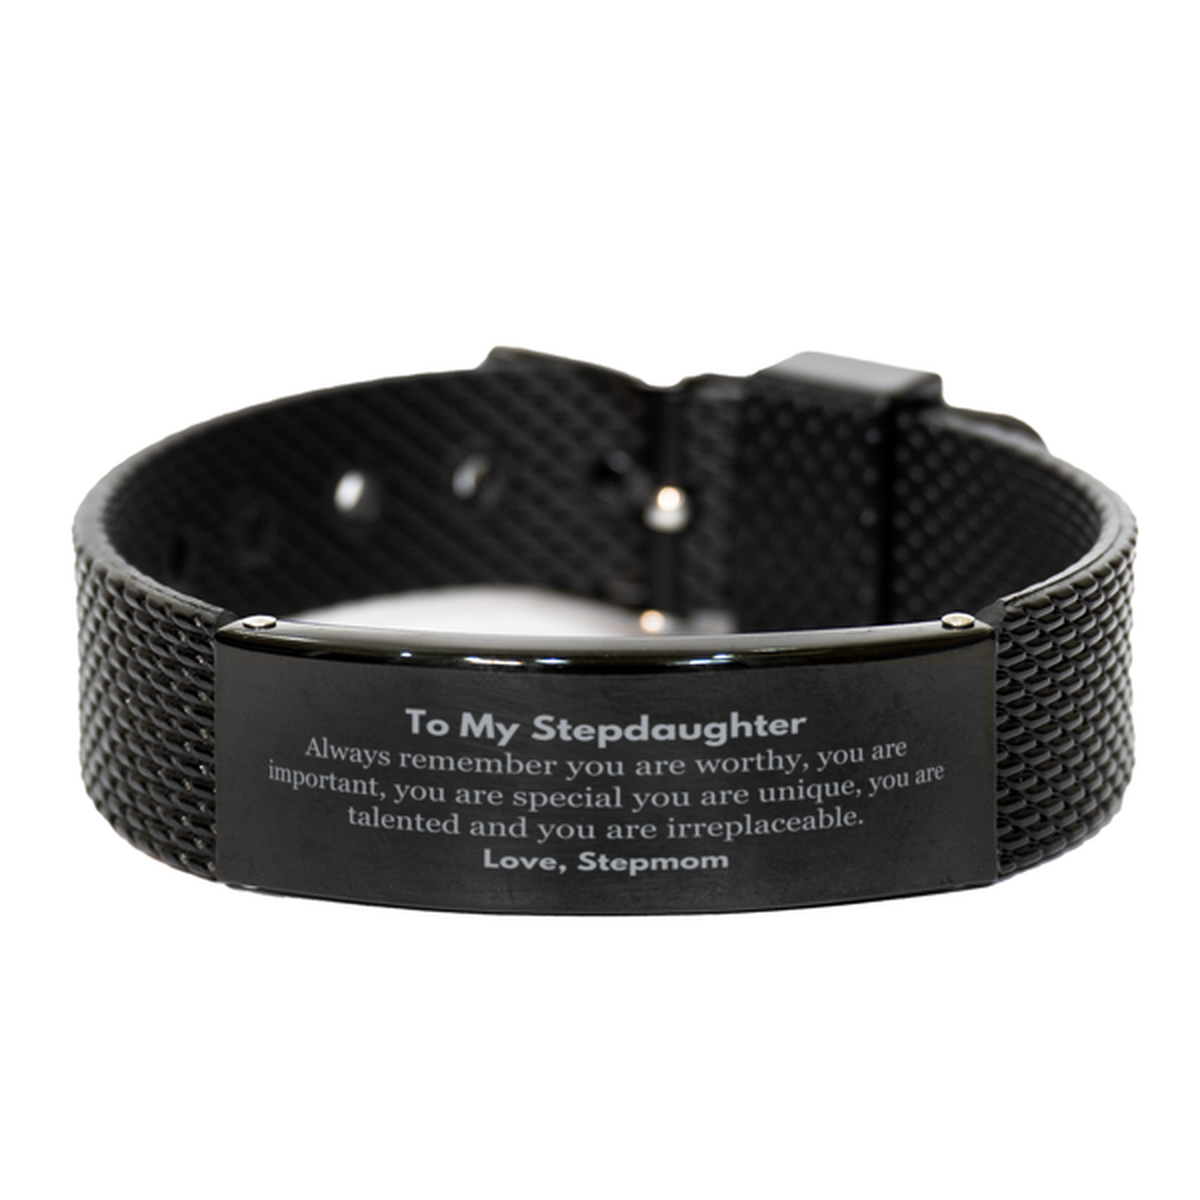 Stepdaughter Birthday Gifts from Stepmom, Inspirational Black Shark Mesh Bracelet for Stepdaughter Christmas Graduation Gifts for Stepdaughter Always remember you are worthy, you are important. Love, Stepmom